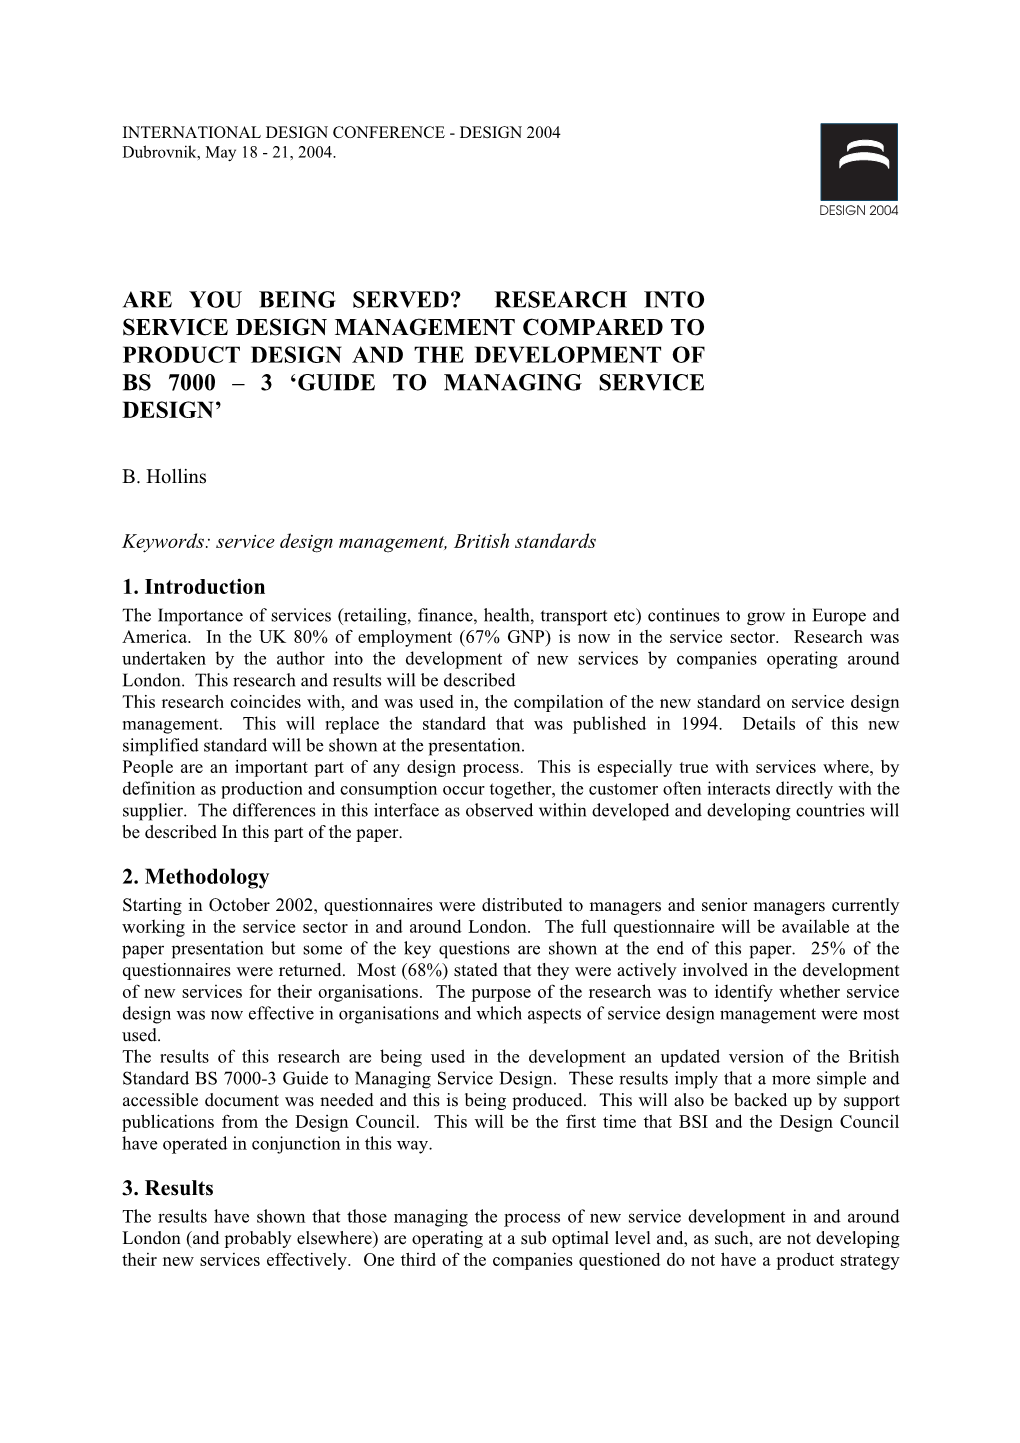 Are You Being Served? Research Into Service Design Management Compared to Product Design and the Development of Bs 7000 – 3 ‘Guide to Managing Service Design’